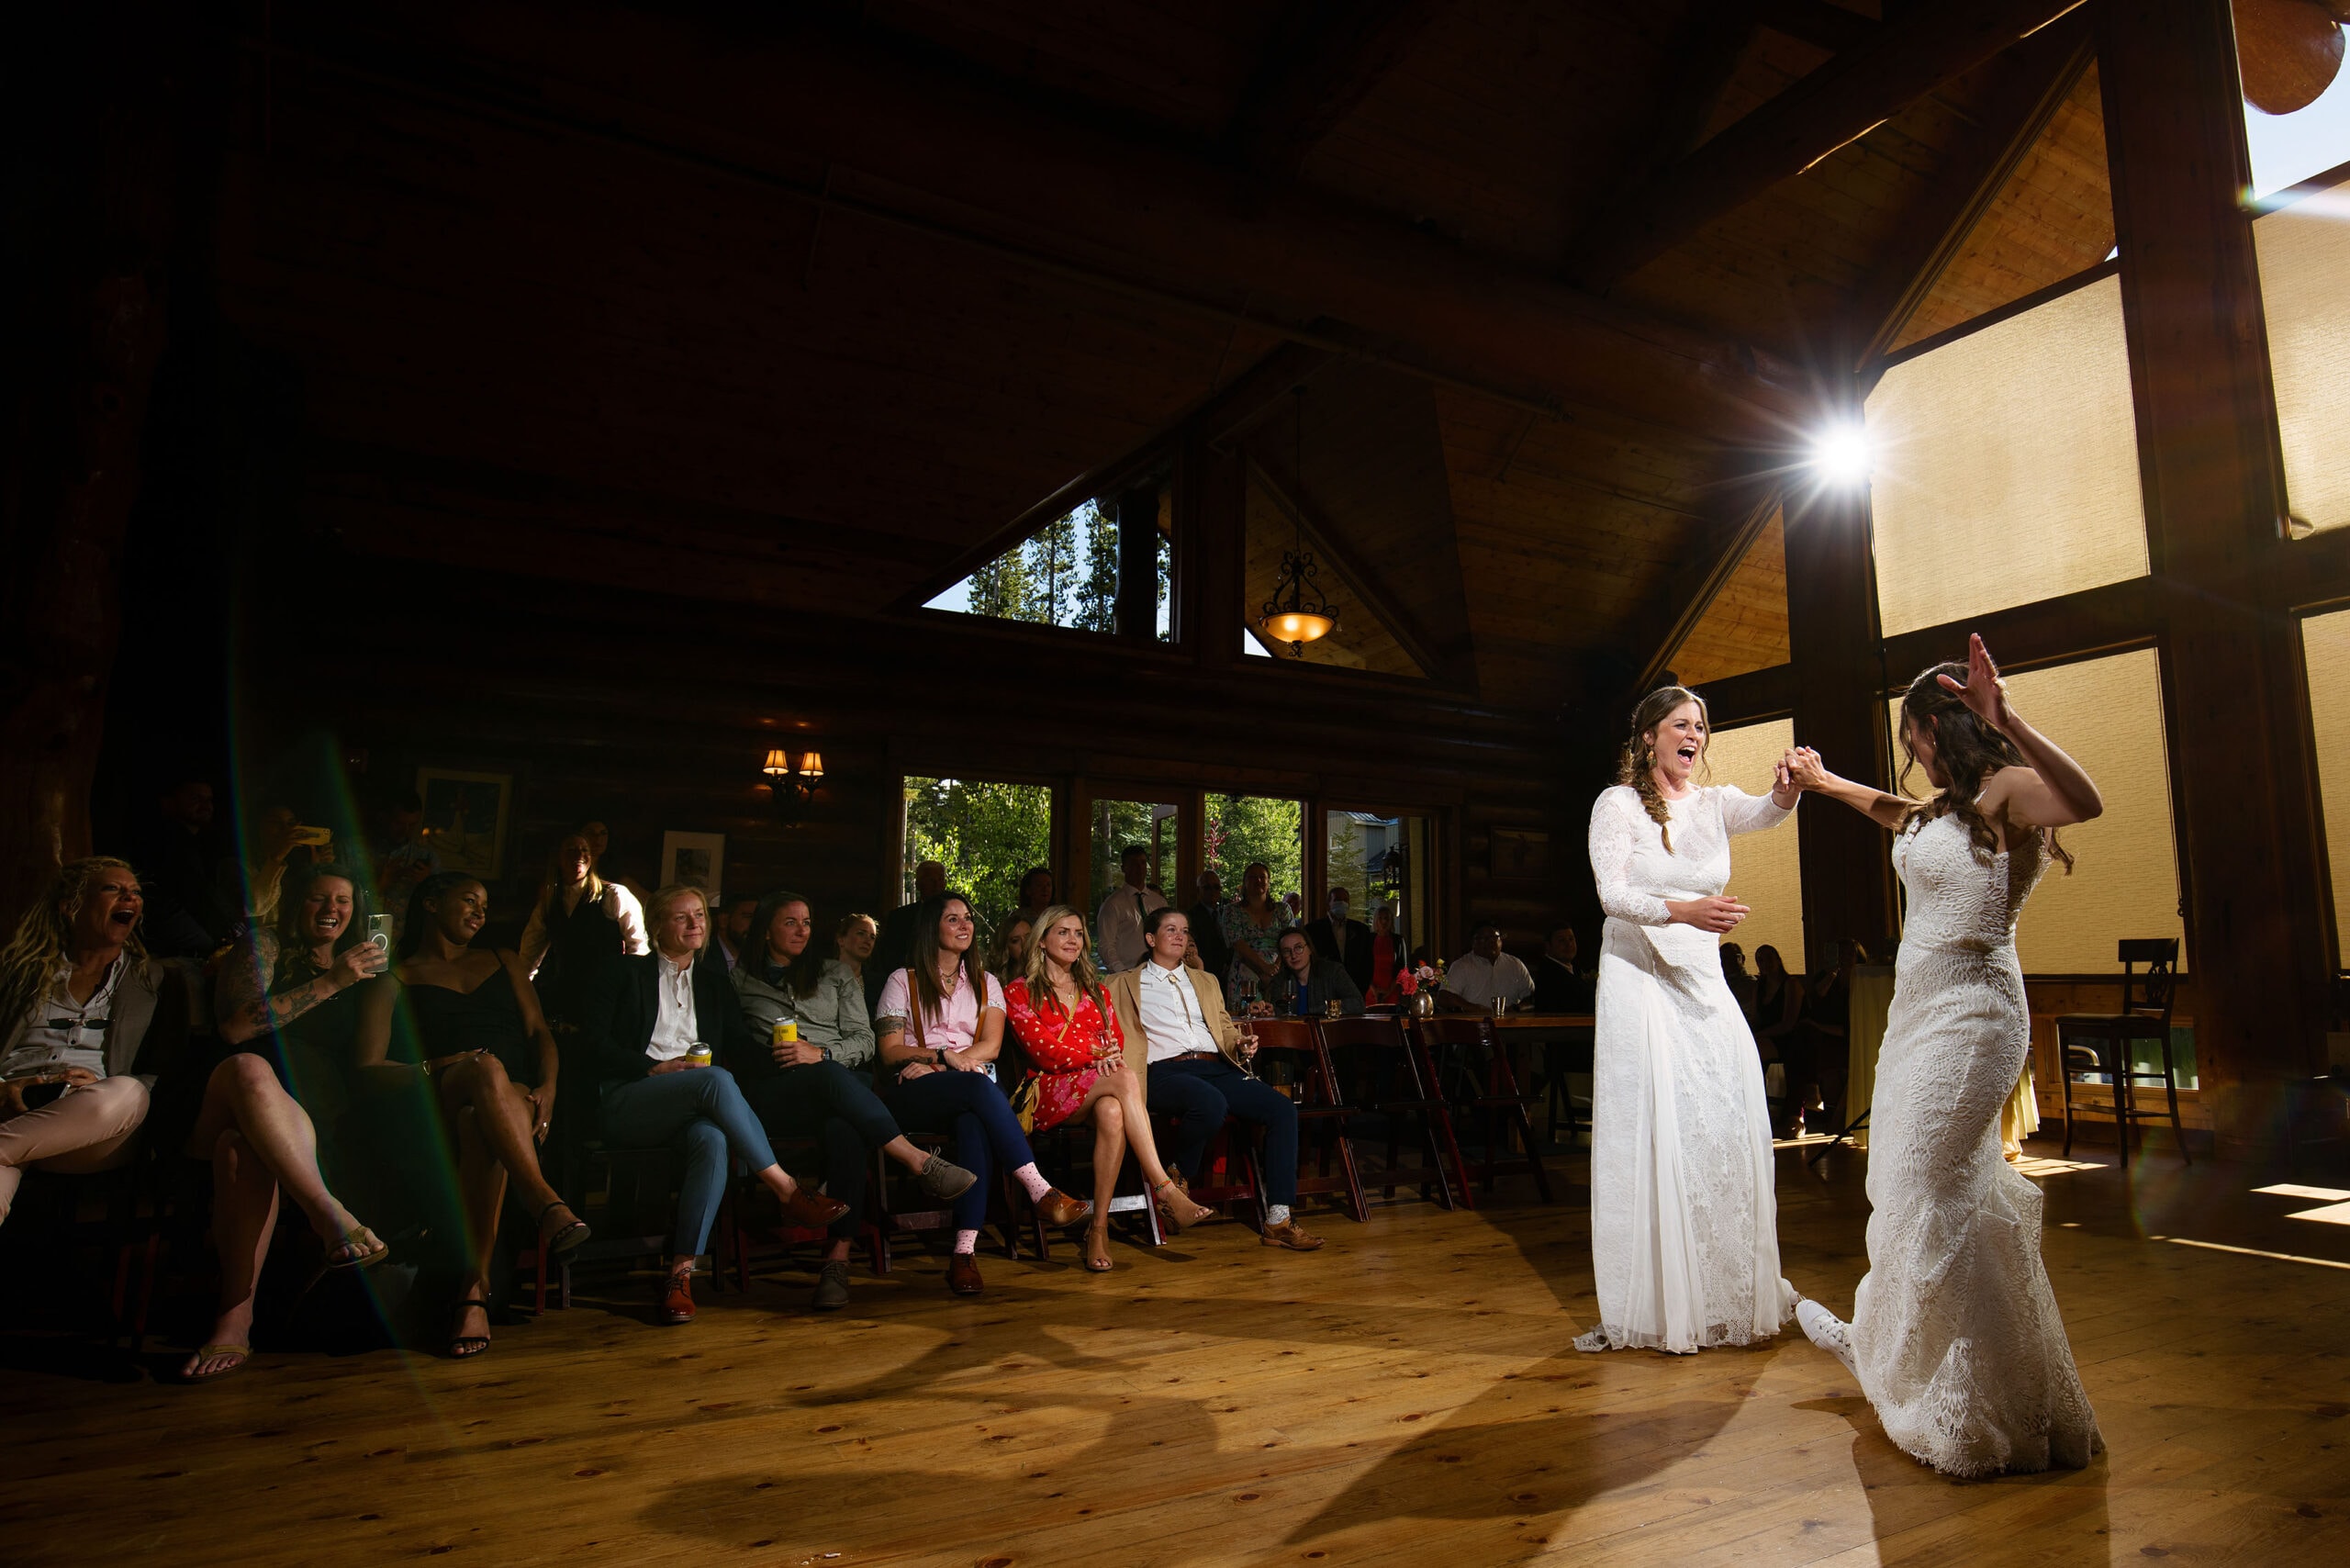 Anna and Cait enjoy their first dance together at Breckenridge Nordic Center